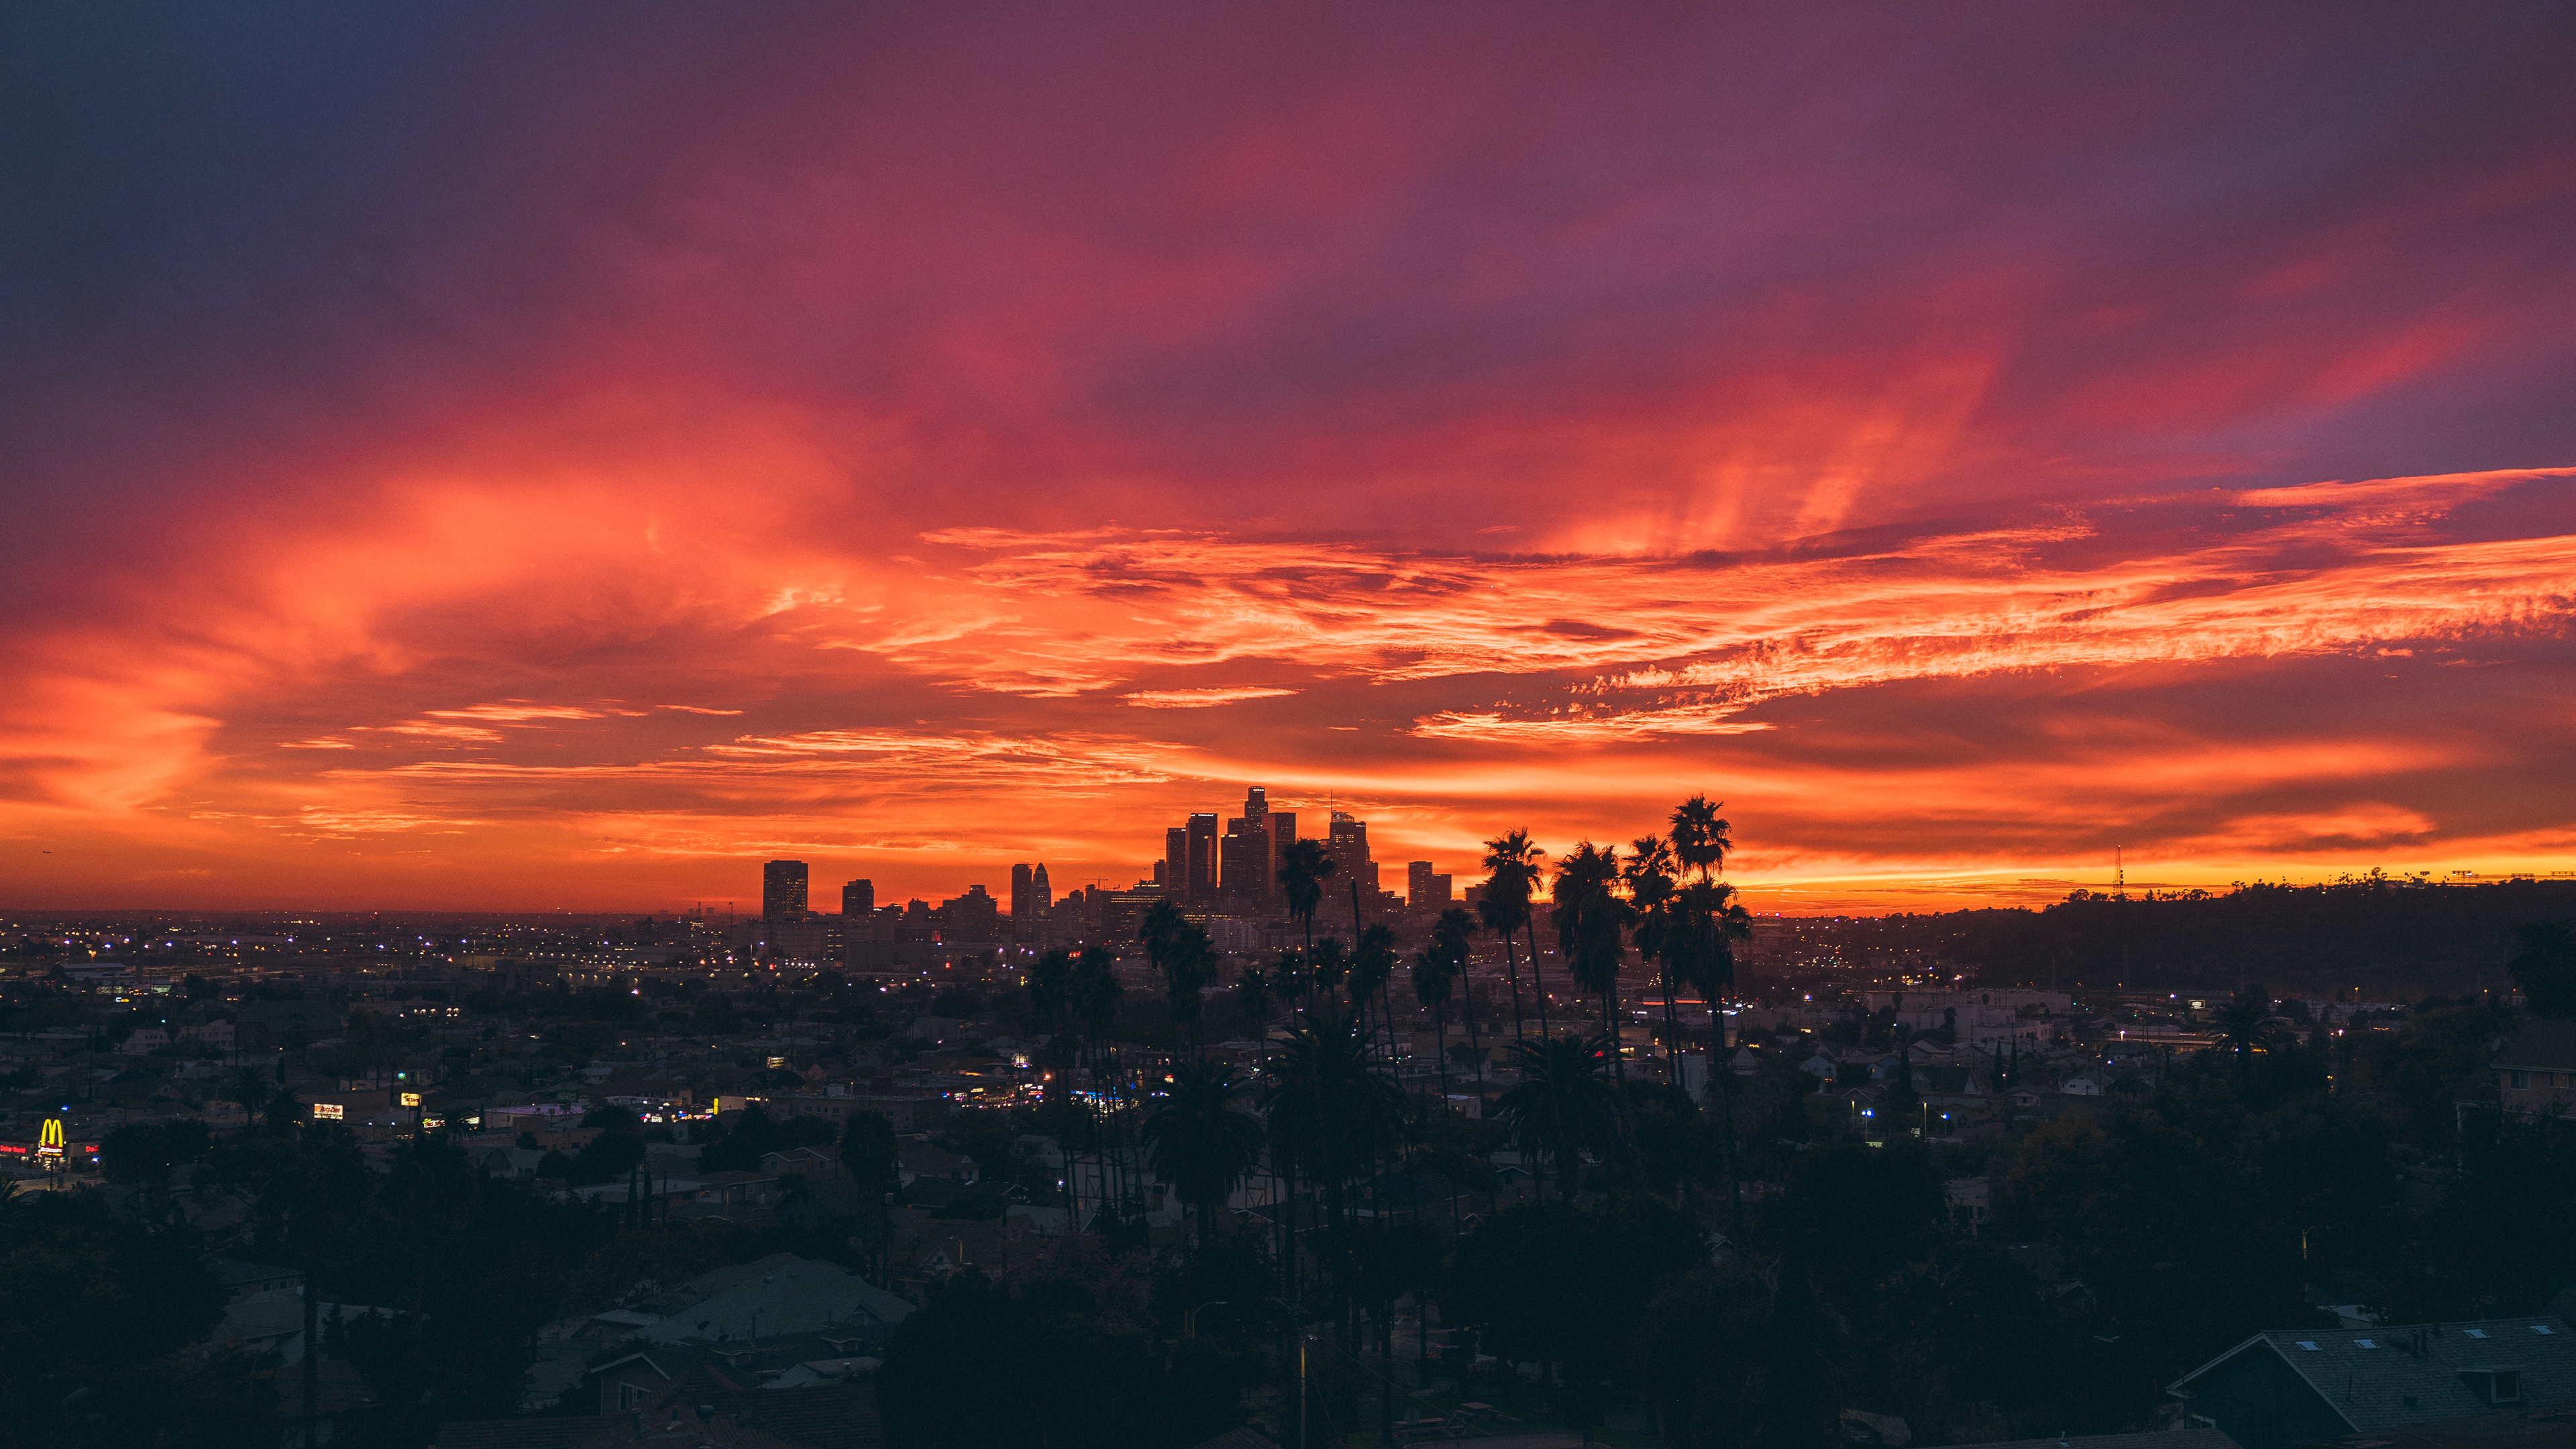 Sunset in Los Angeles [3840x2160][OC]